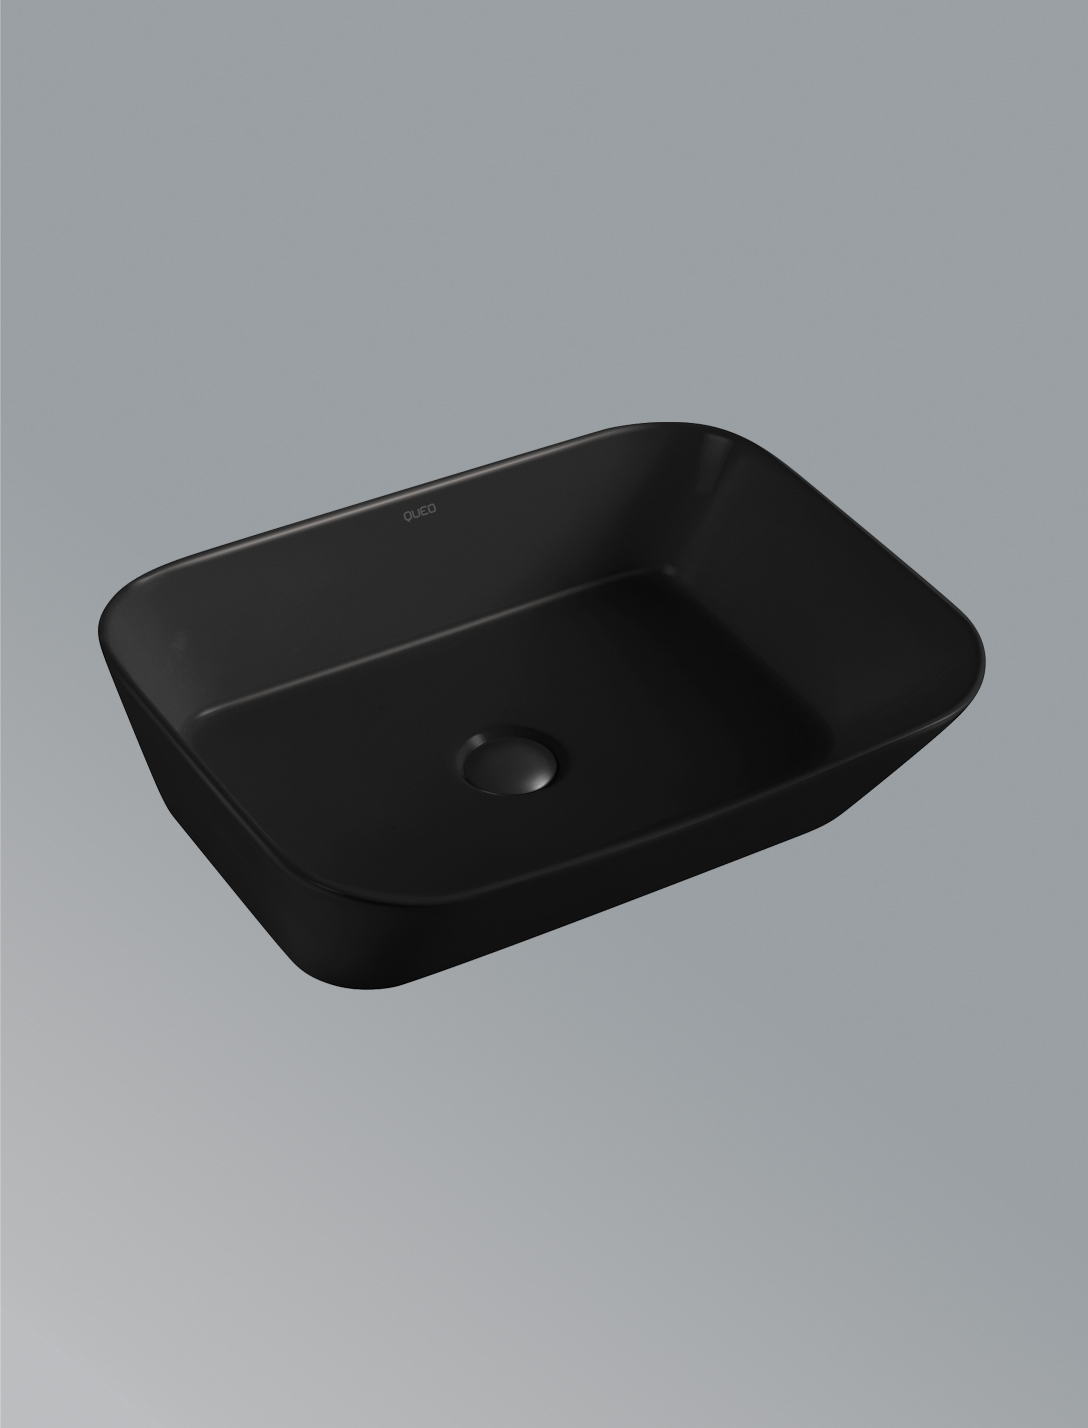 Over the counter basin without faucet hole in in matt black